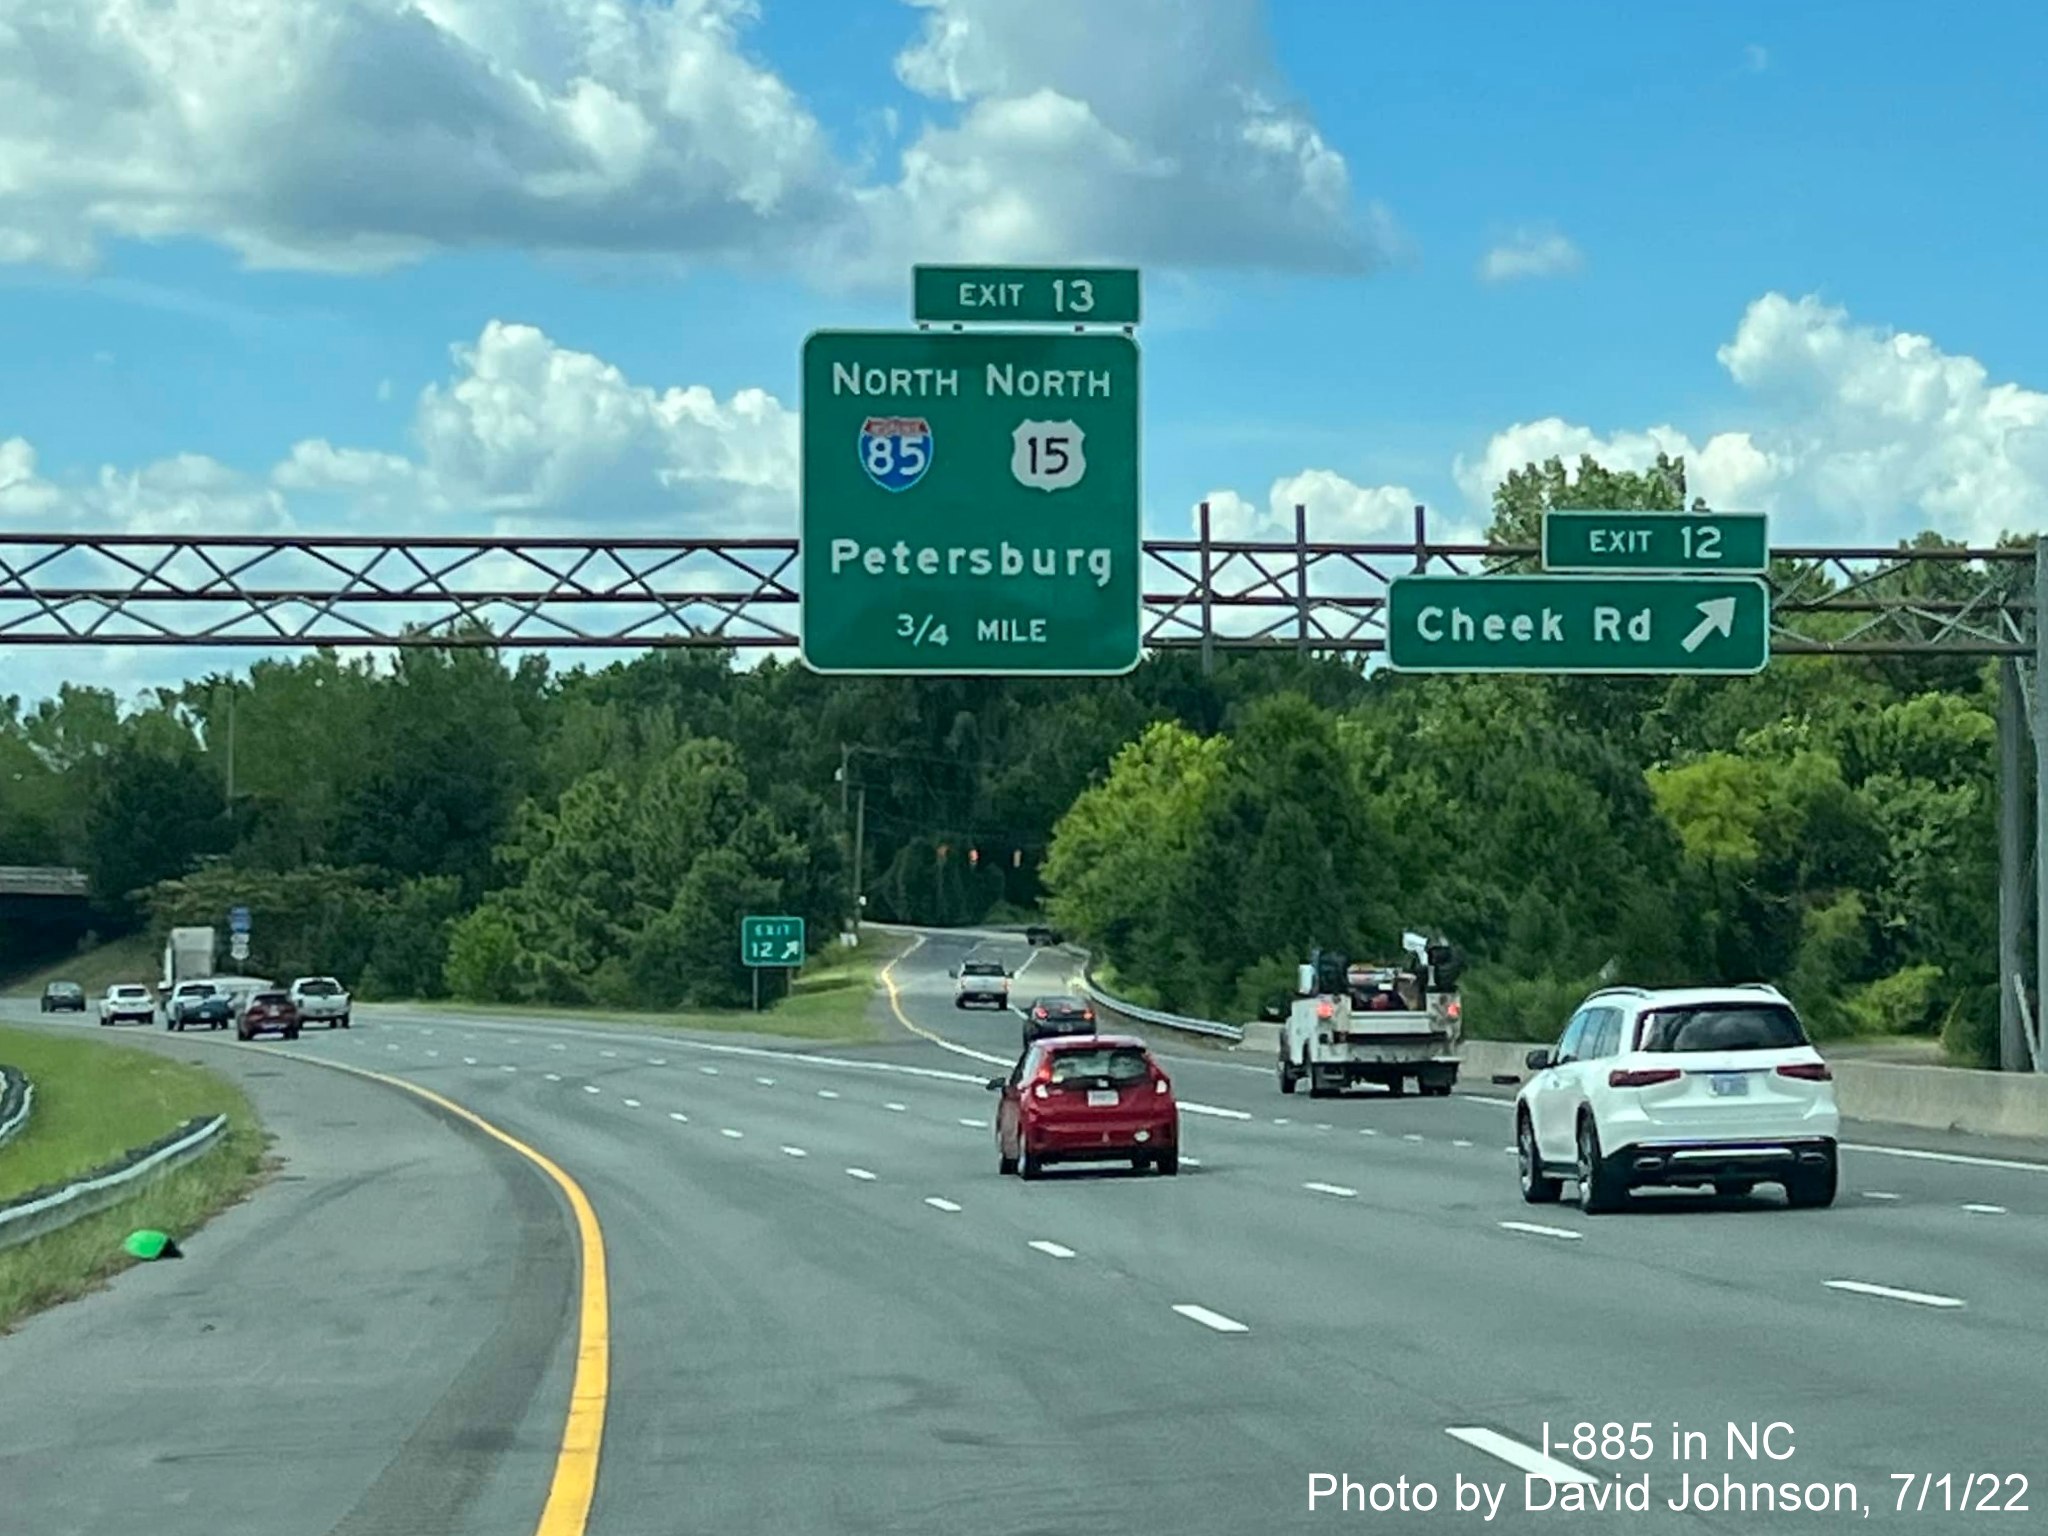 Image of overhead signage on I-885 North/US 70 West approaching Cheek Road exit ramp, by David Johnson July 2022